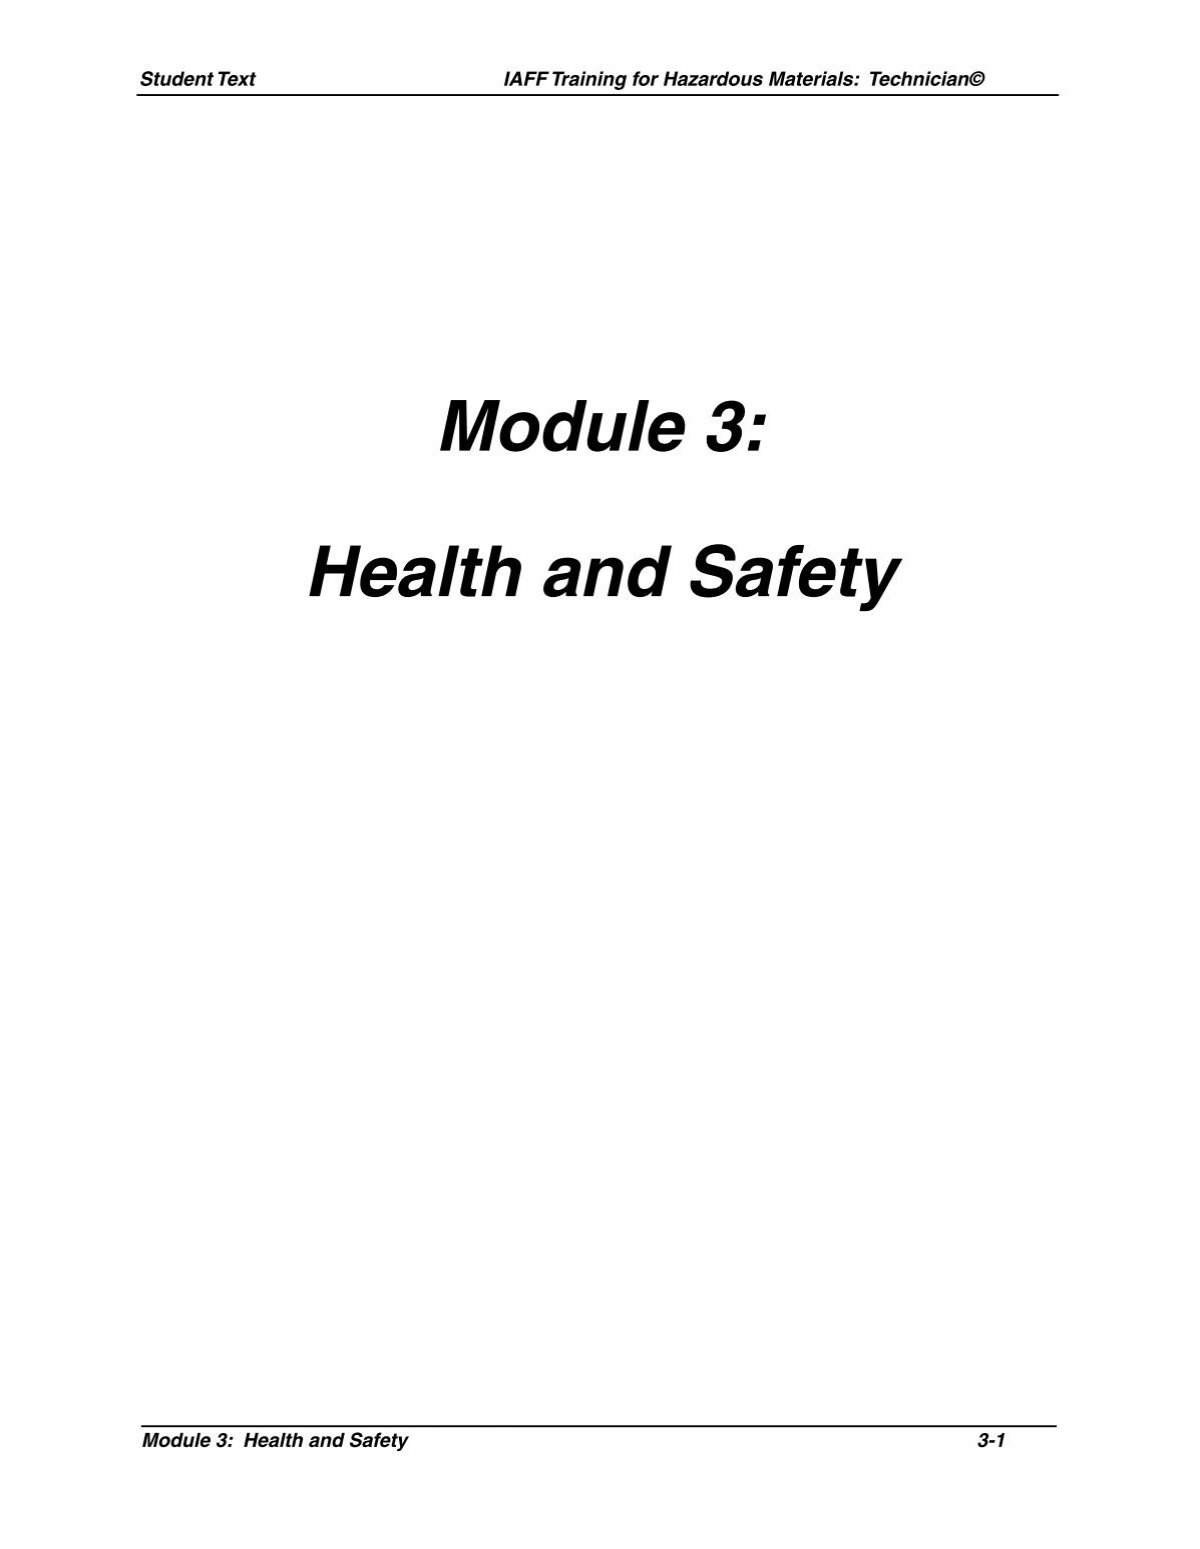 Module 3: Health and Safety - IAFF